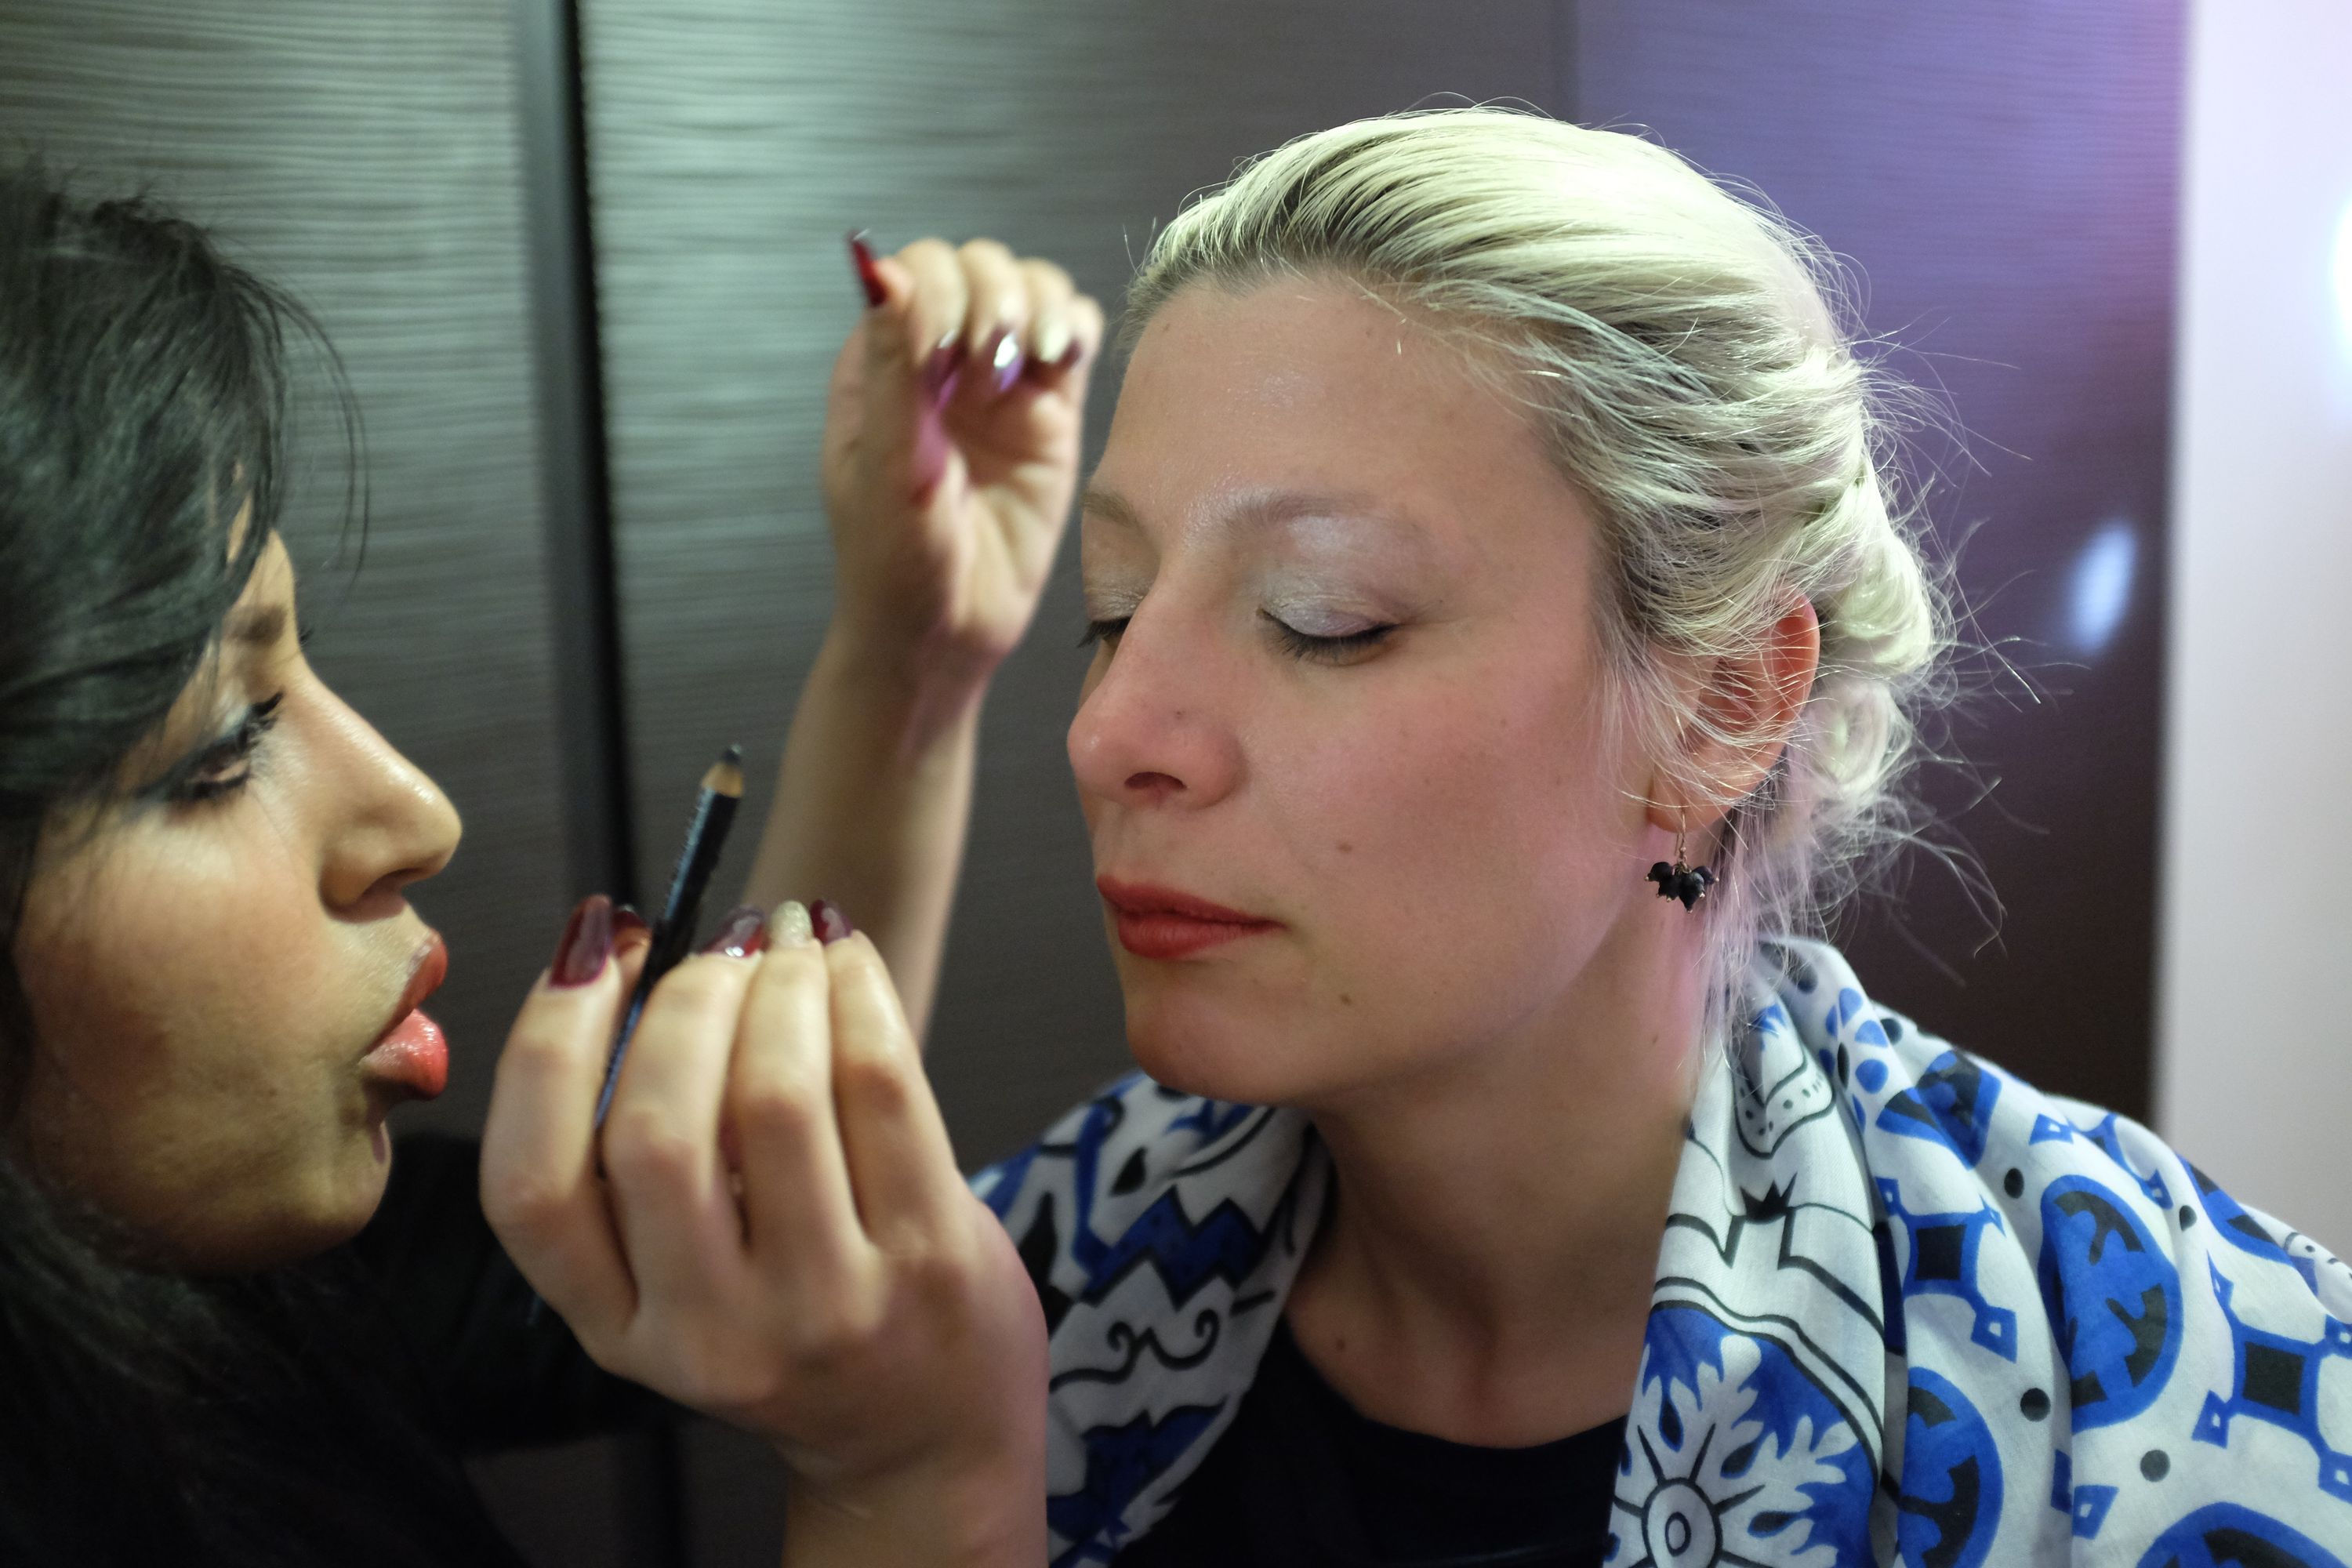 A black-haired woman applies makeup to a blond woman whose eyes are closed.